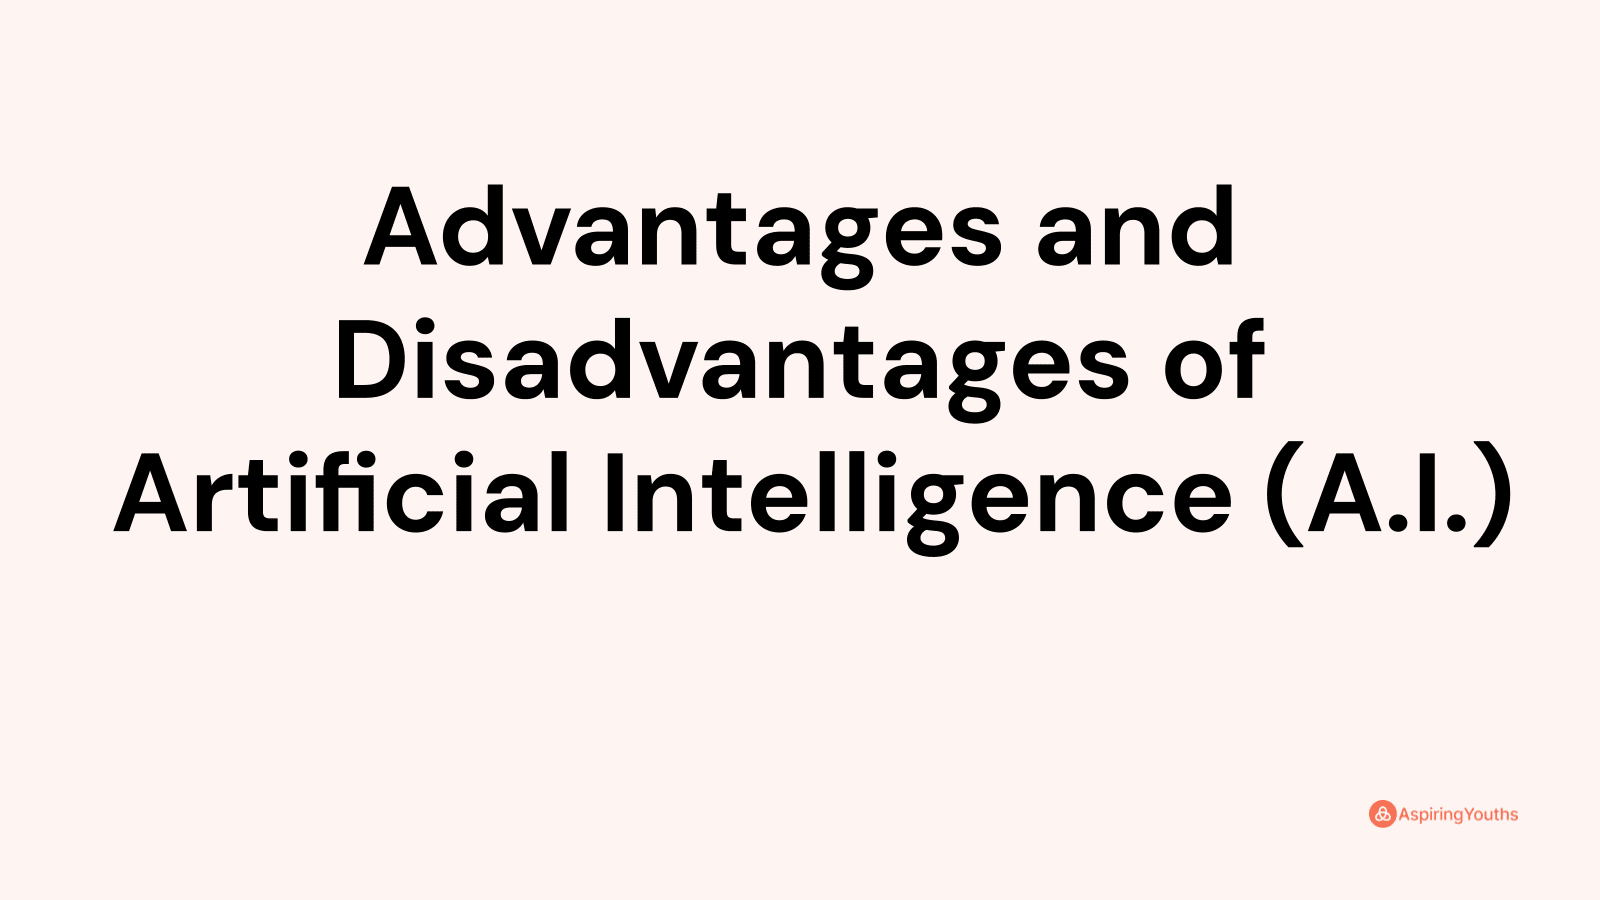 Advantages and disadvantages of Artificial Intelligence (A.I.)